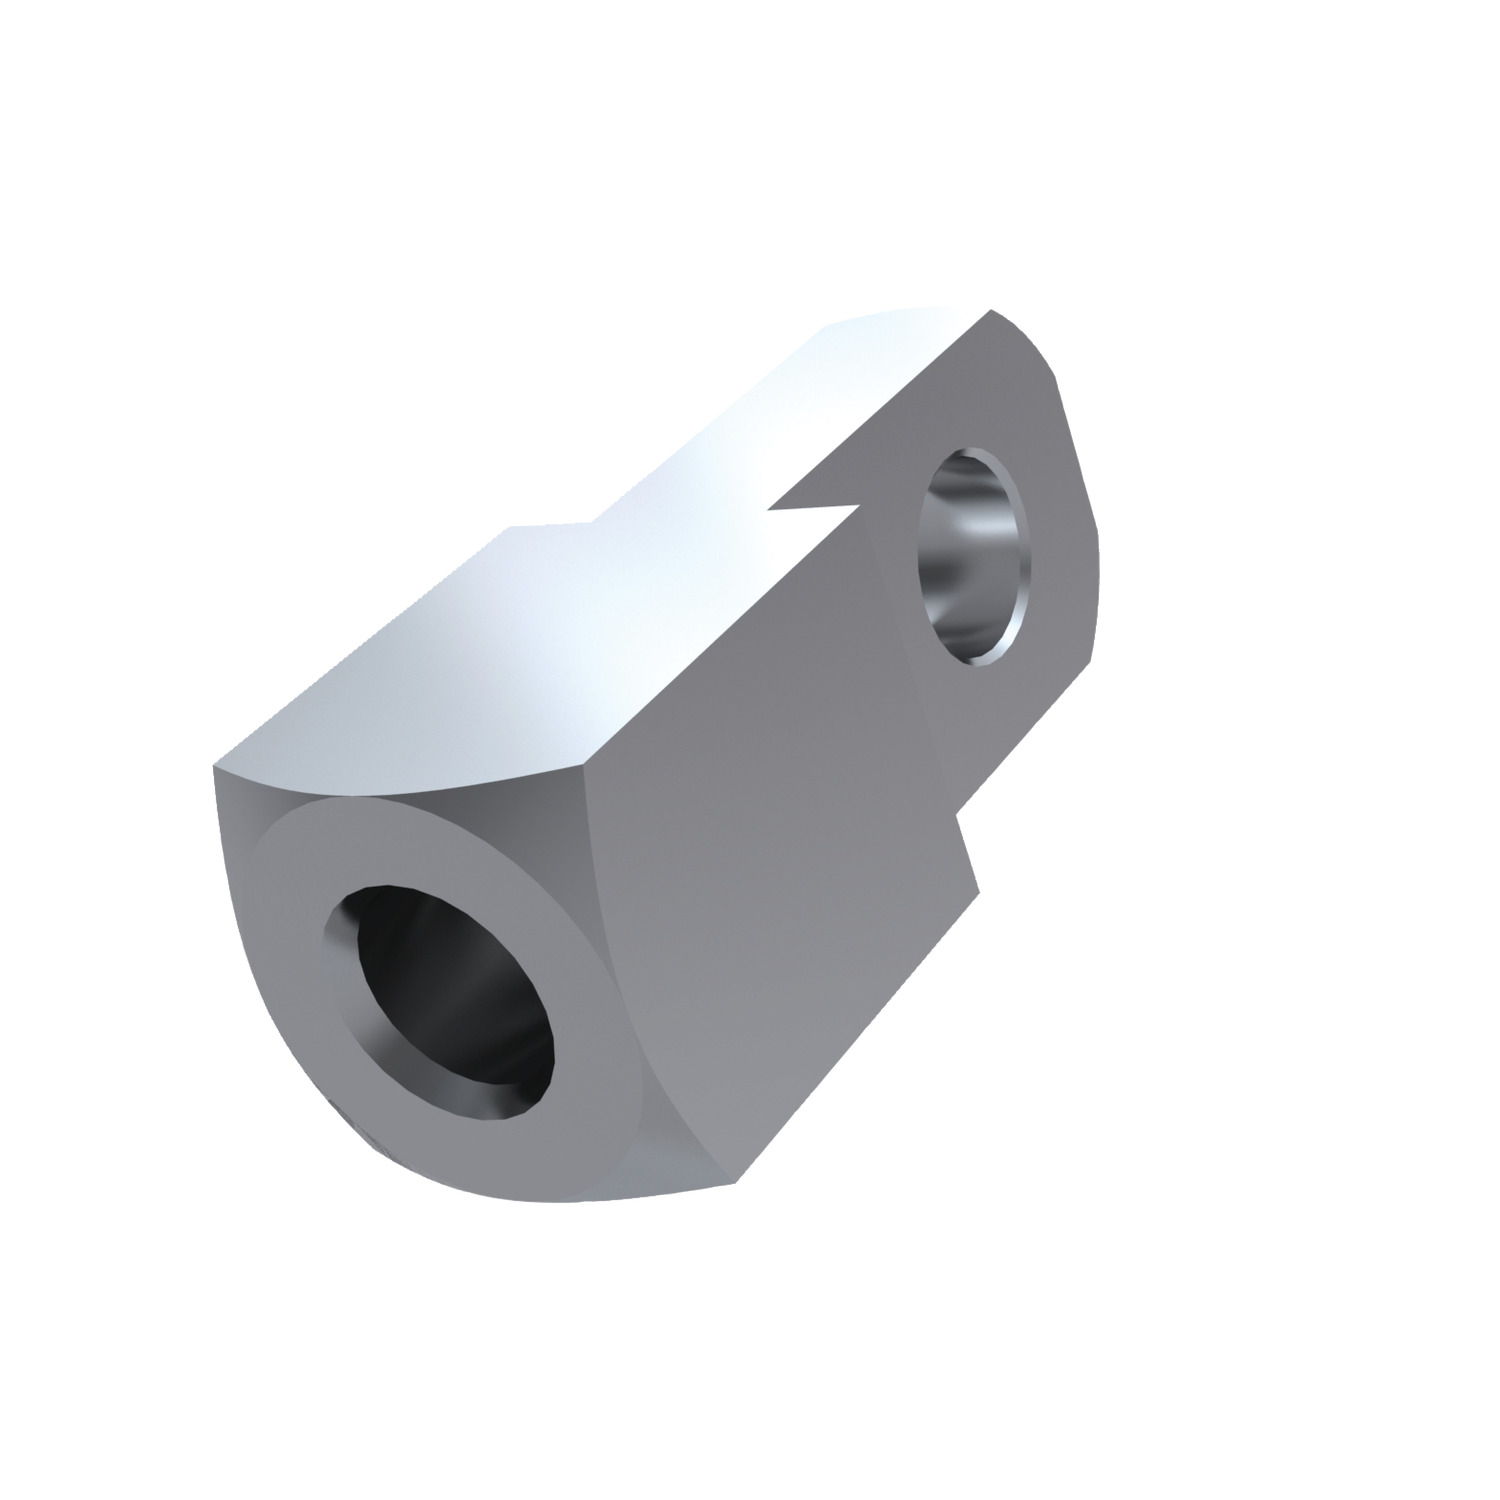 Product R3420, Mating Piece for Clevis Joints silver zinc plated / 